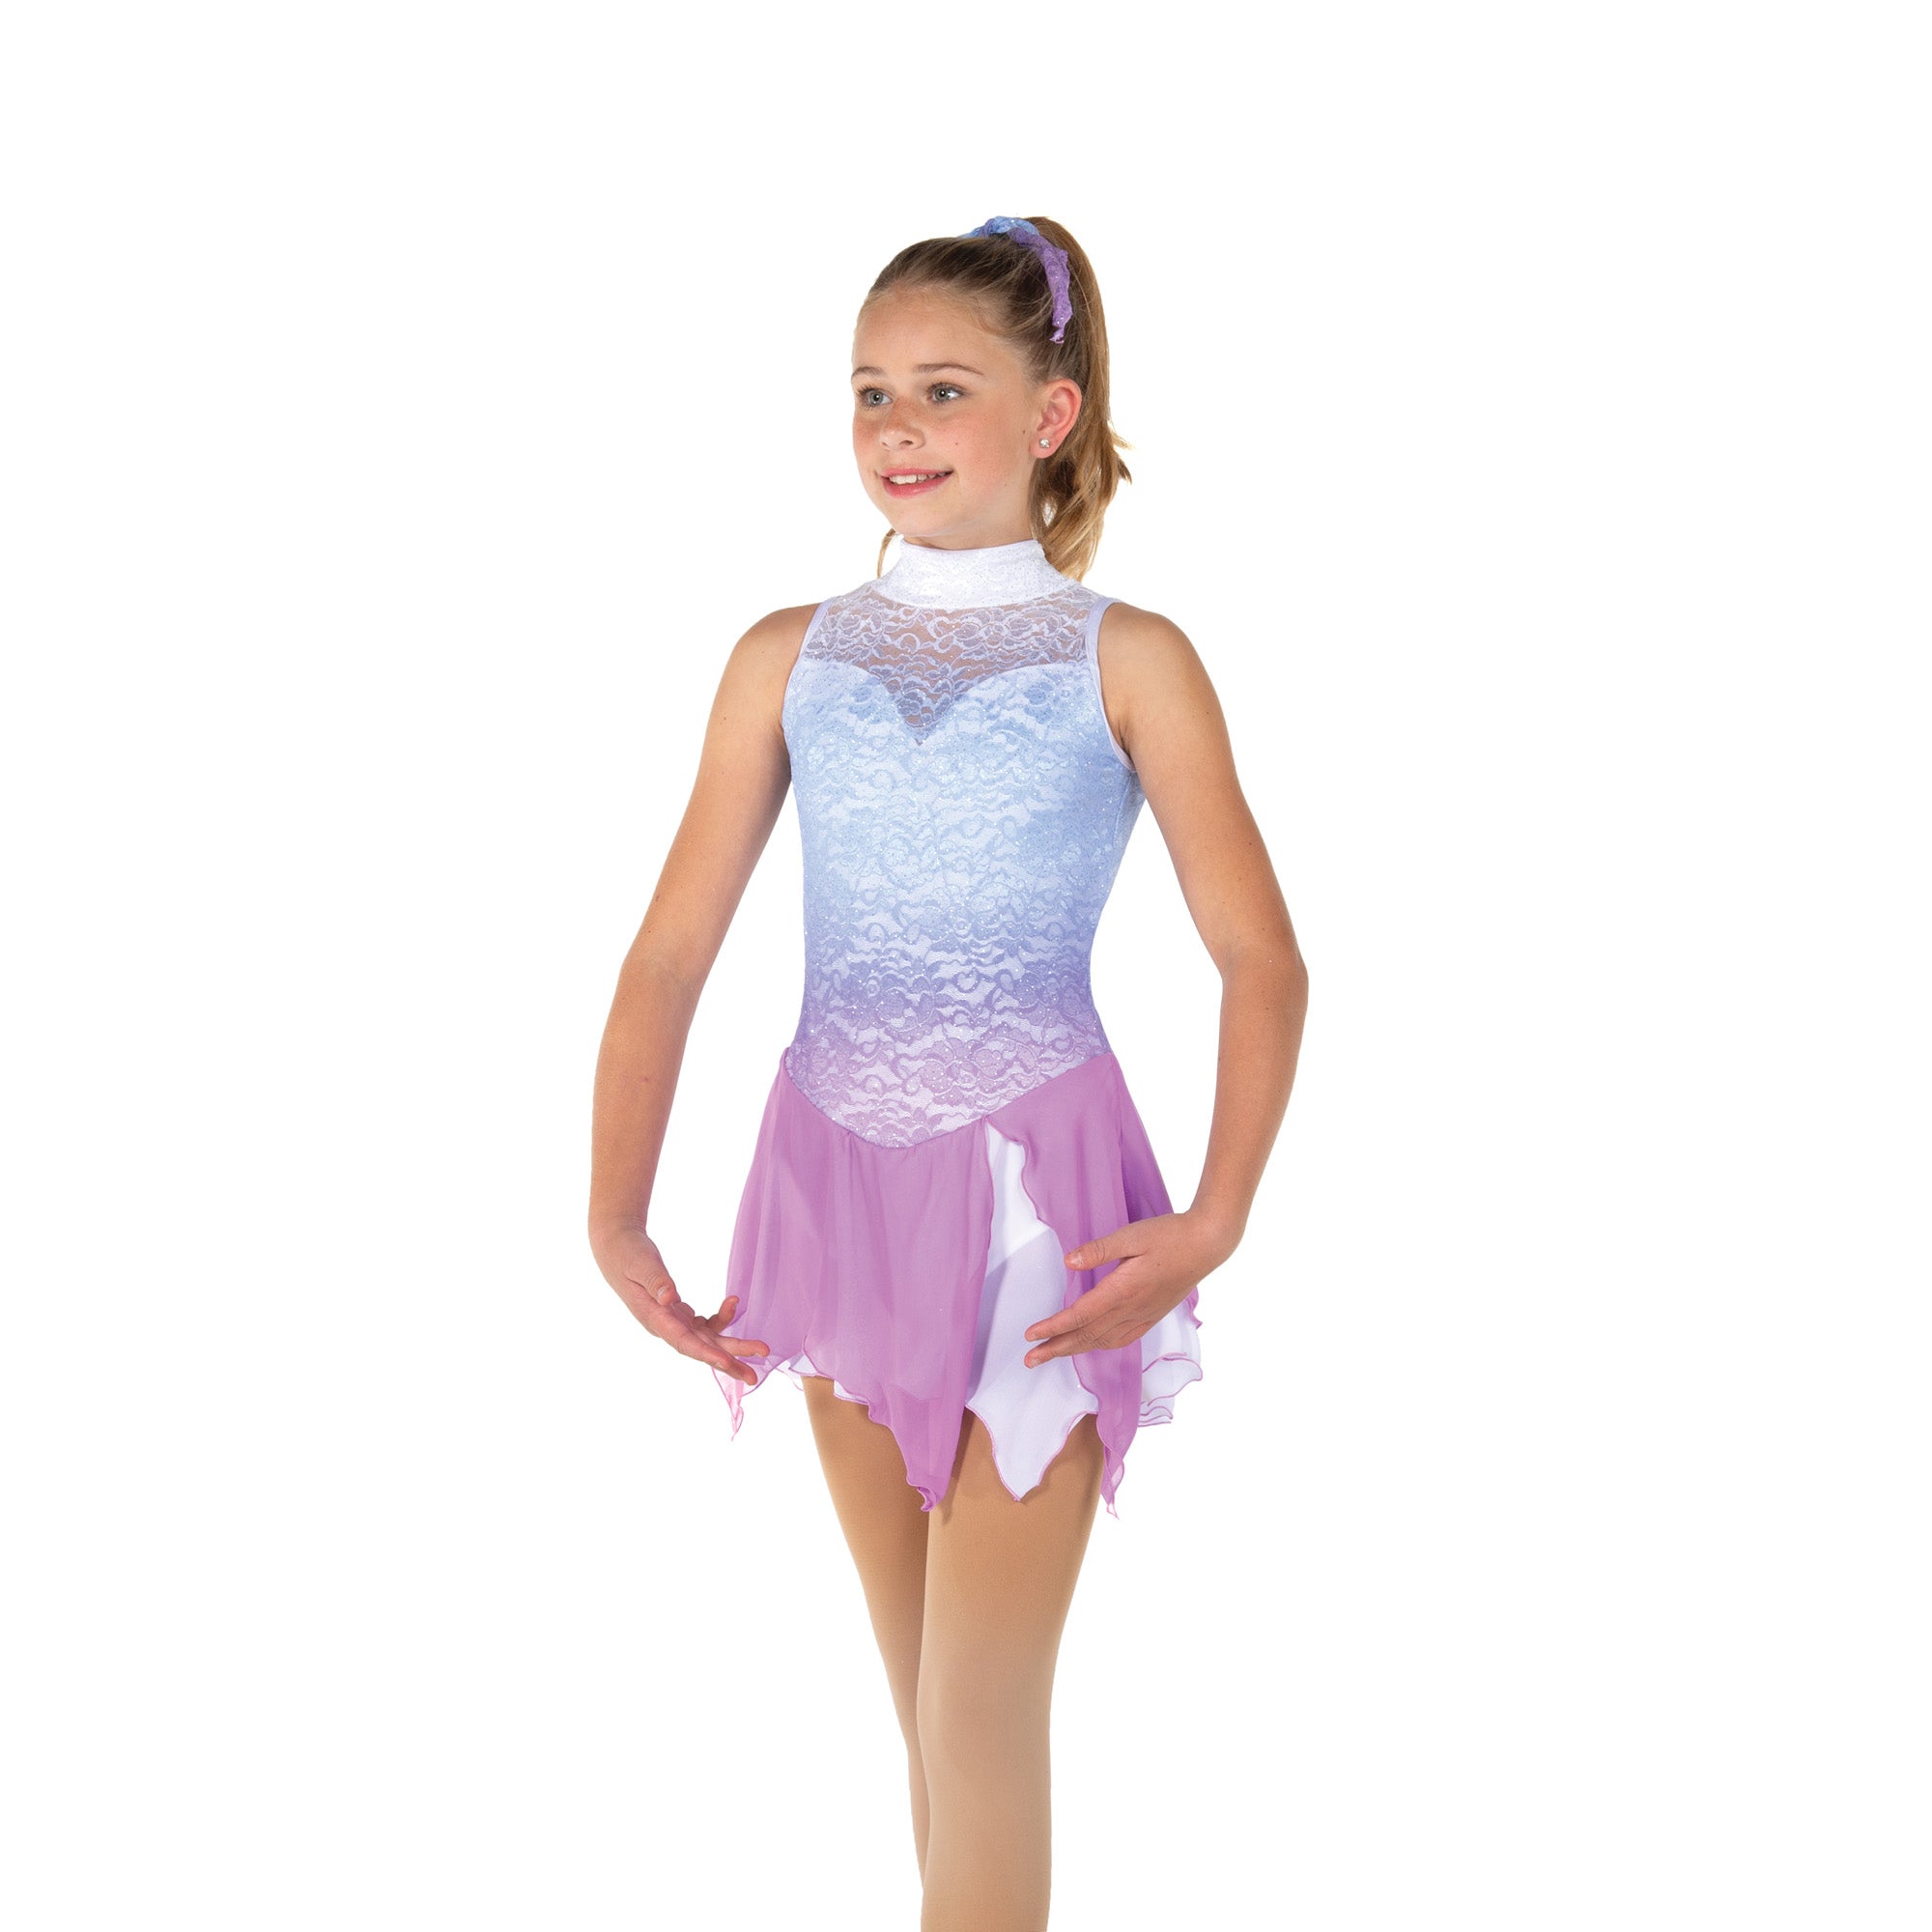 49 Waterford Skating Dress in White, Blue & Purple by Jerry's